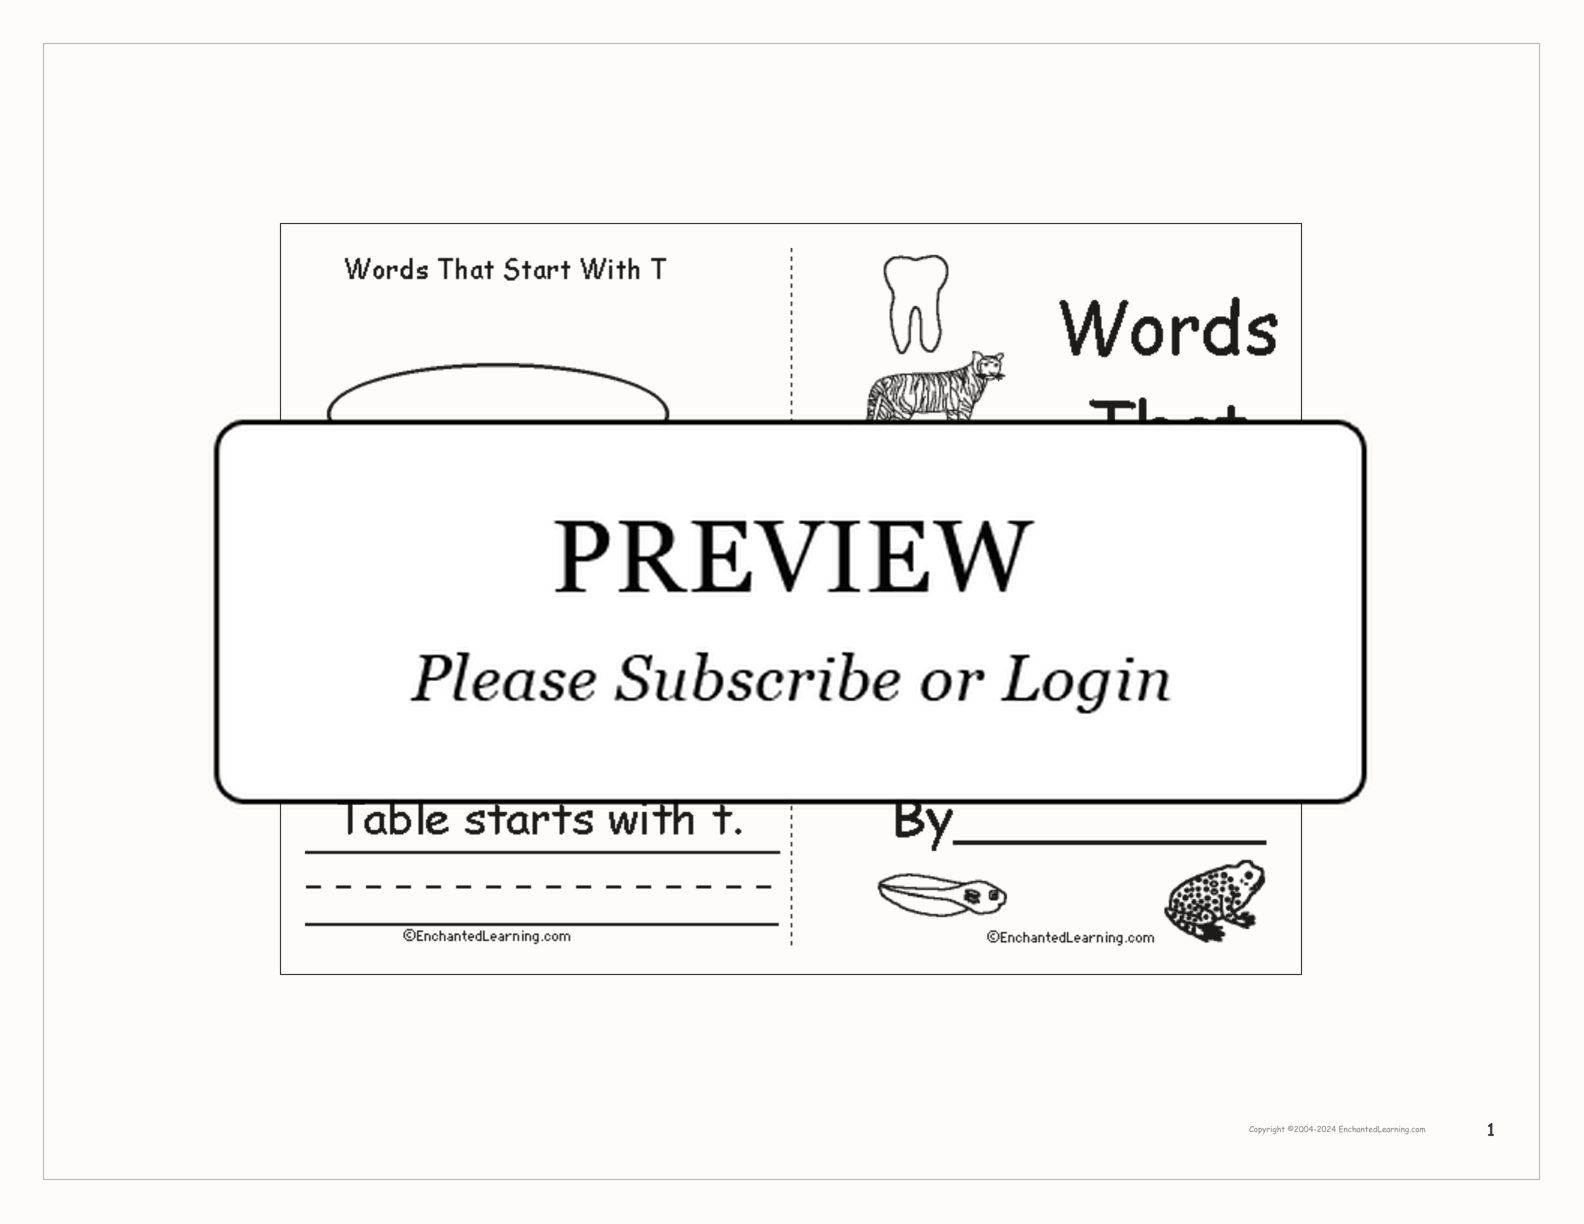 Words That Start With T interactive printout page 1